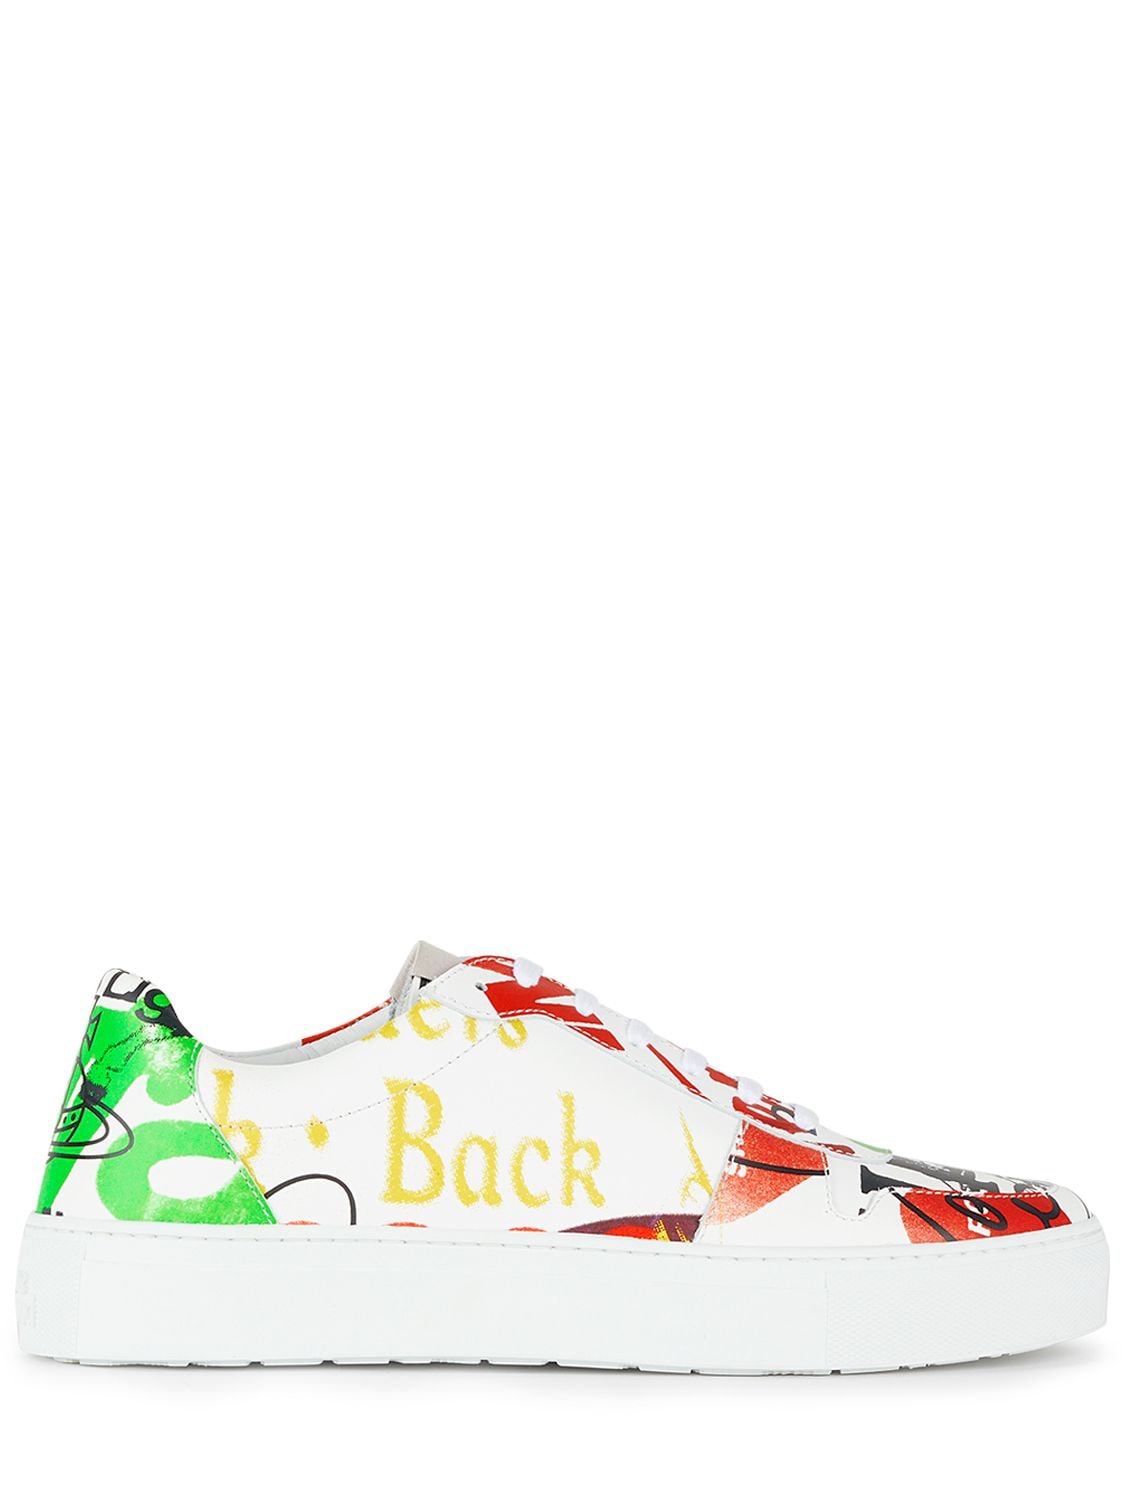 Vivienne Westwood 10mm Classic Leather Low Top Sneakers In Multicolor